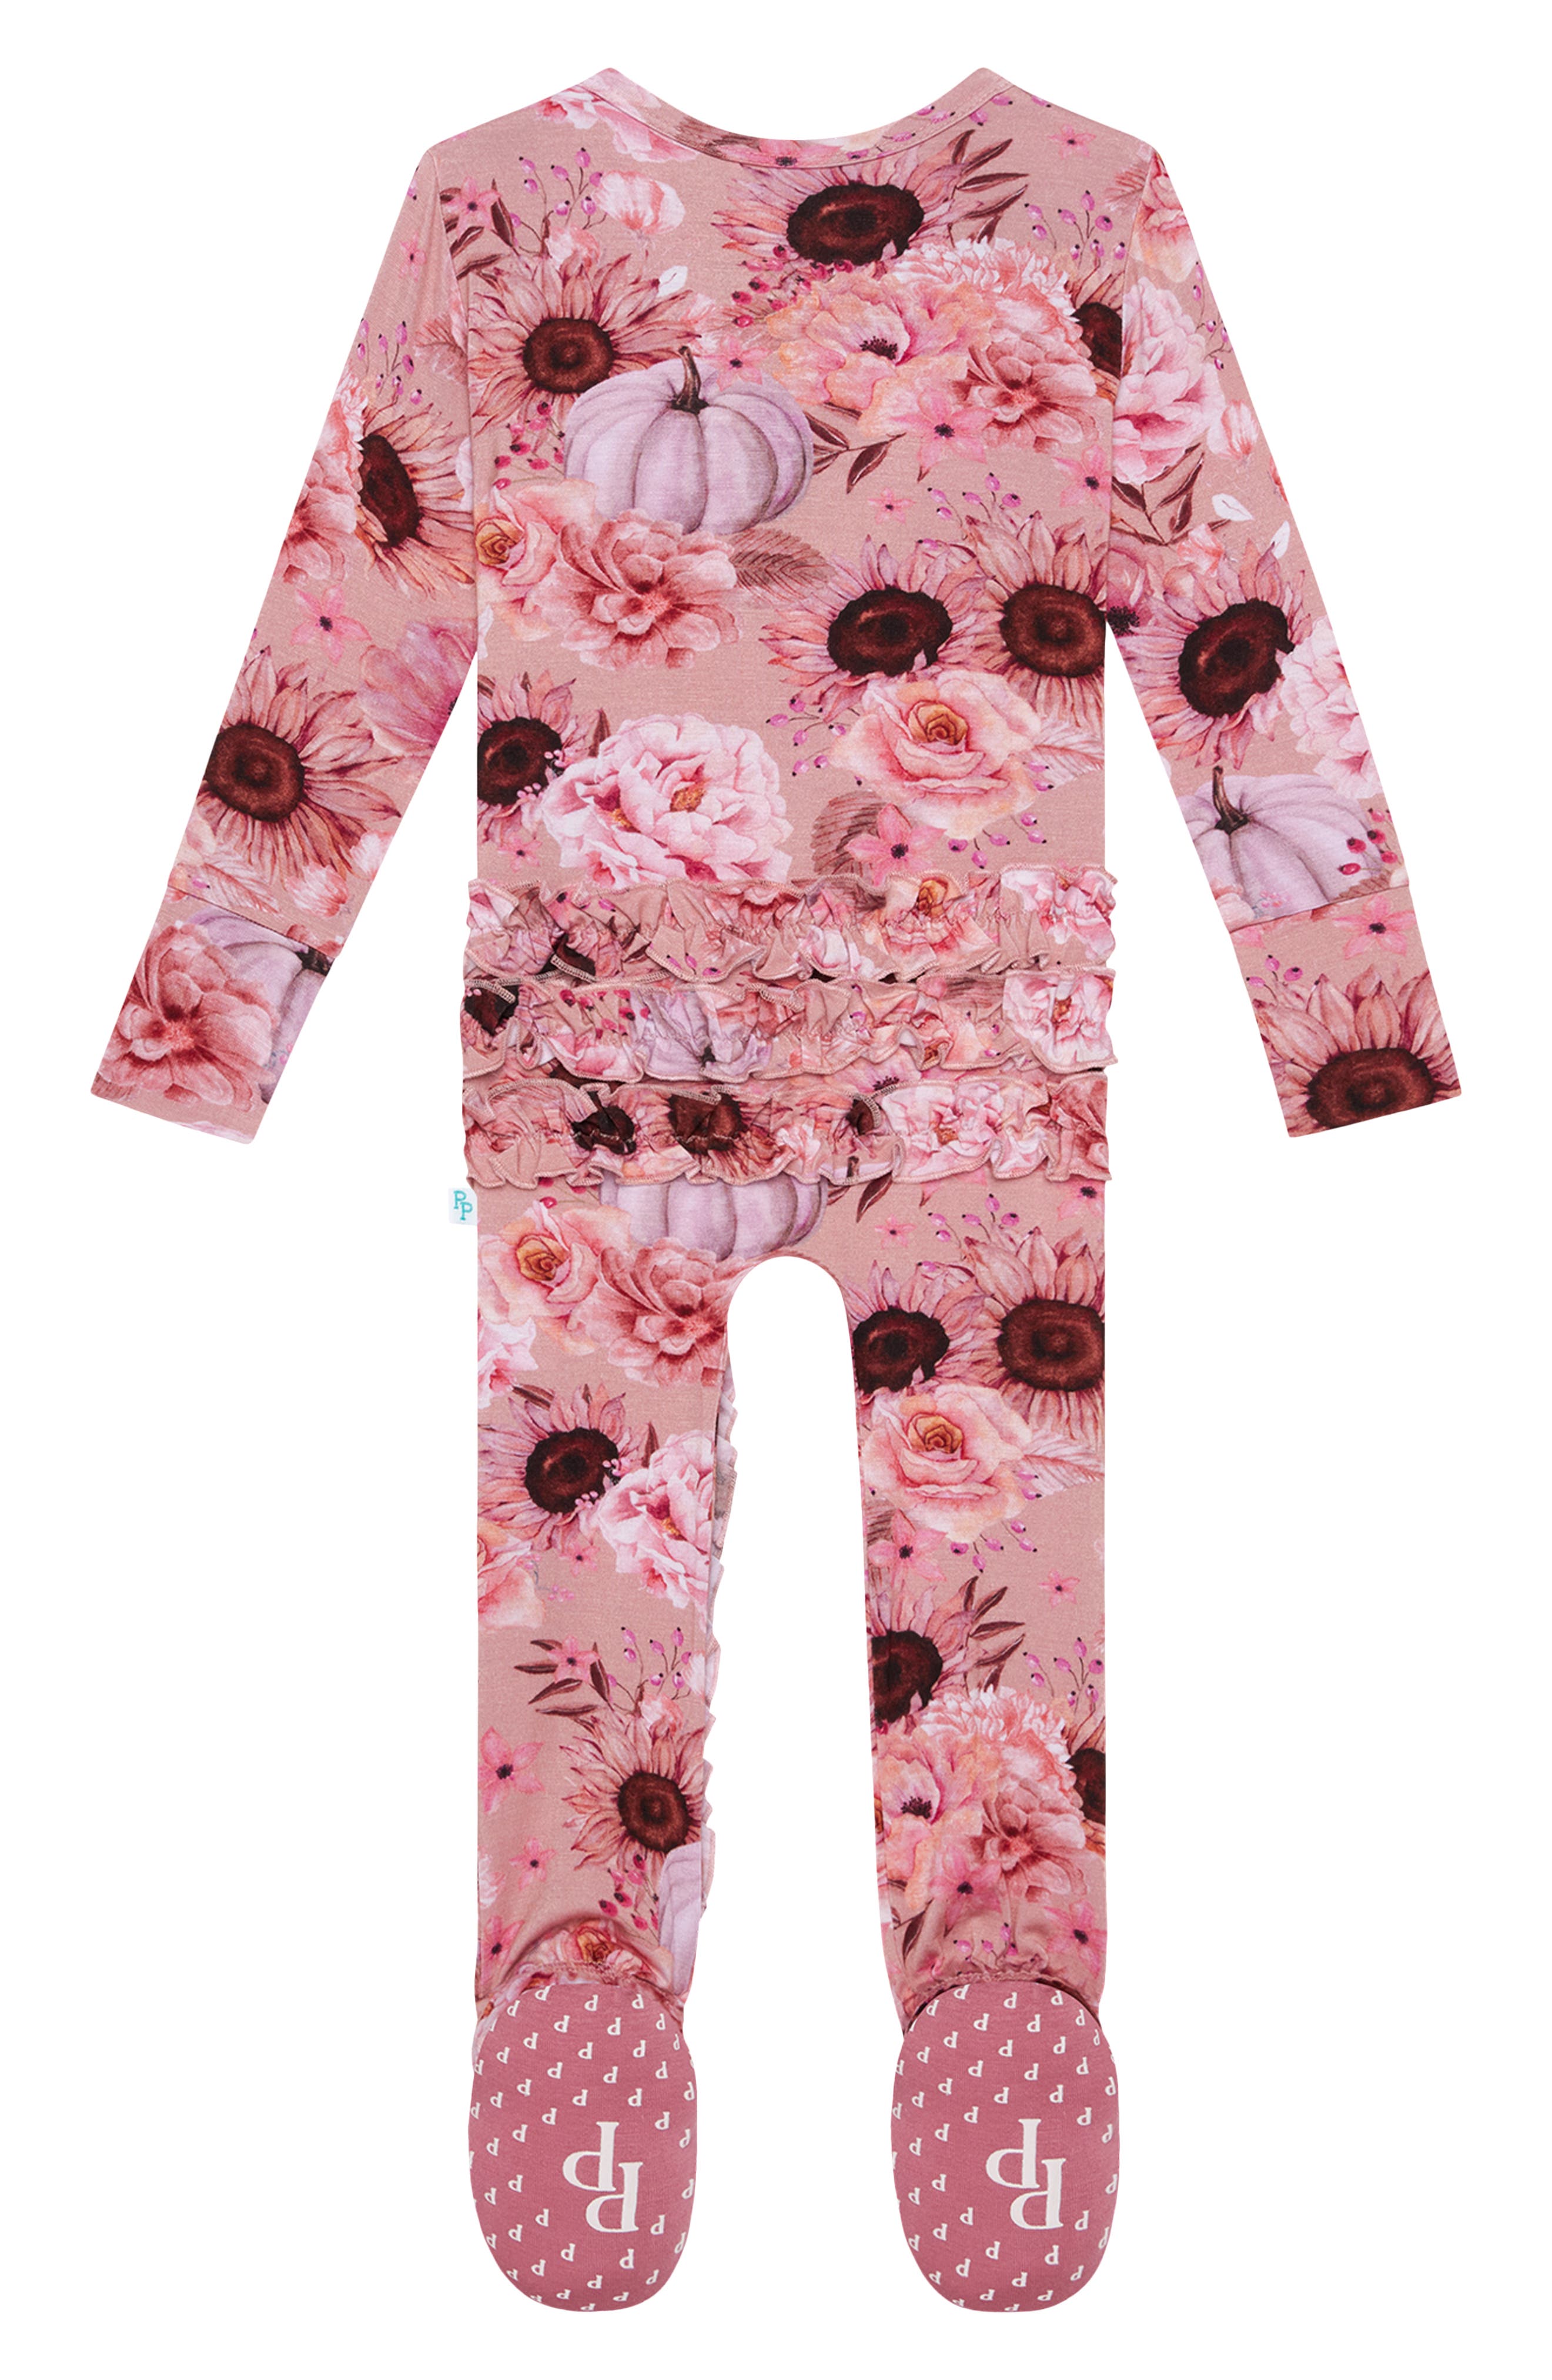 Nordstrom Baby Clothing Loungewear Pajamas Liliana Floral Ruffle Zip Fitted Footie Pajamas in Pink Overflow at Nordstrom 